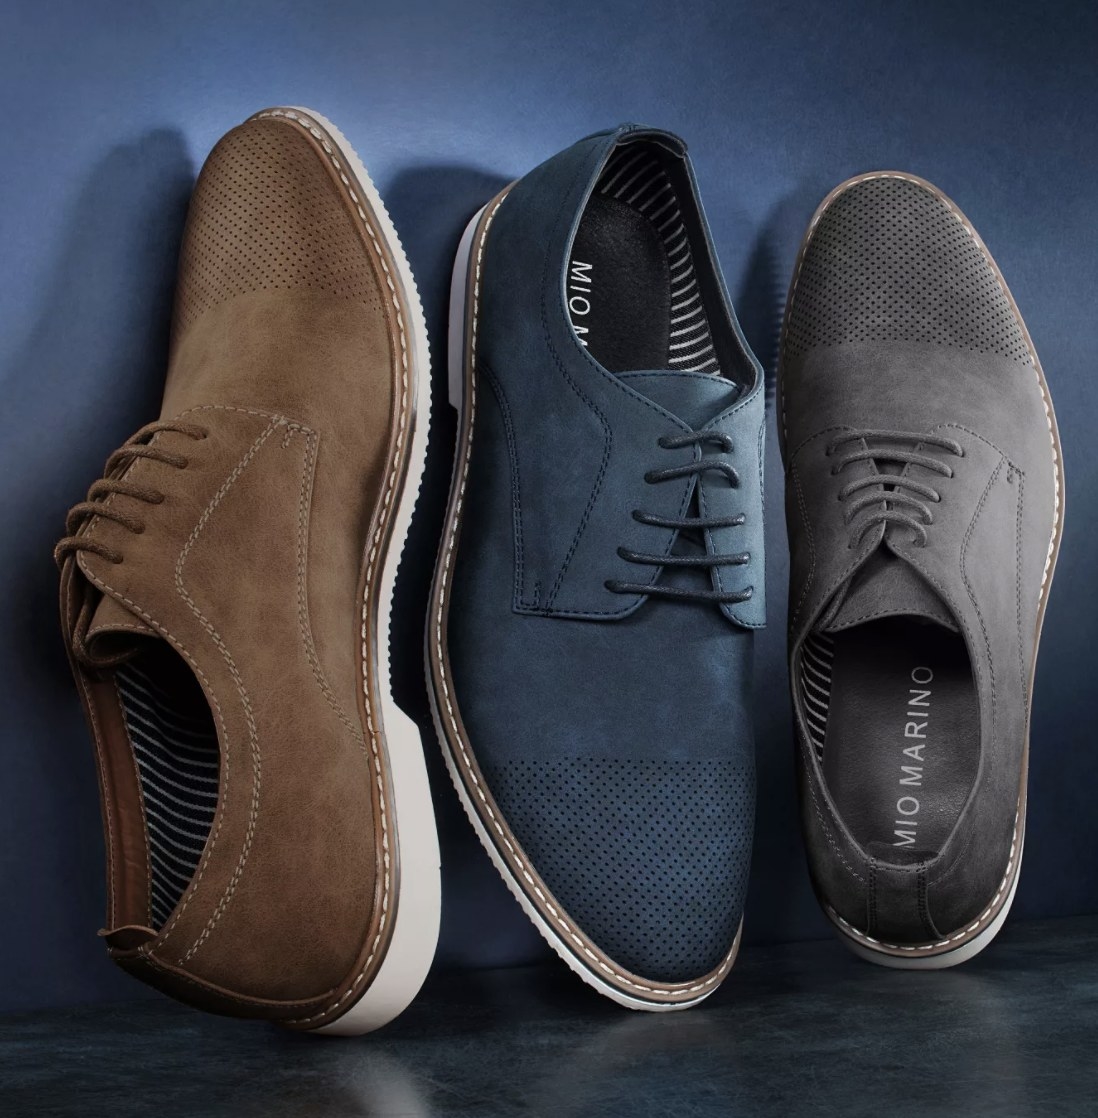 There are one brown, blue and grey shoe laid against a blue background